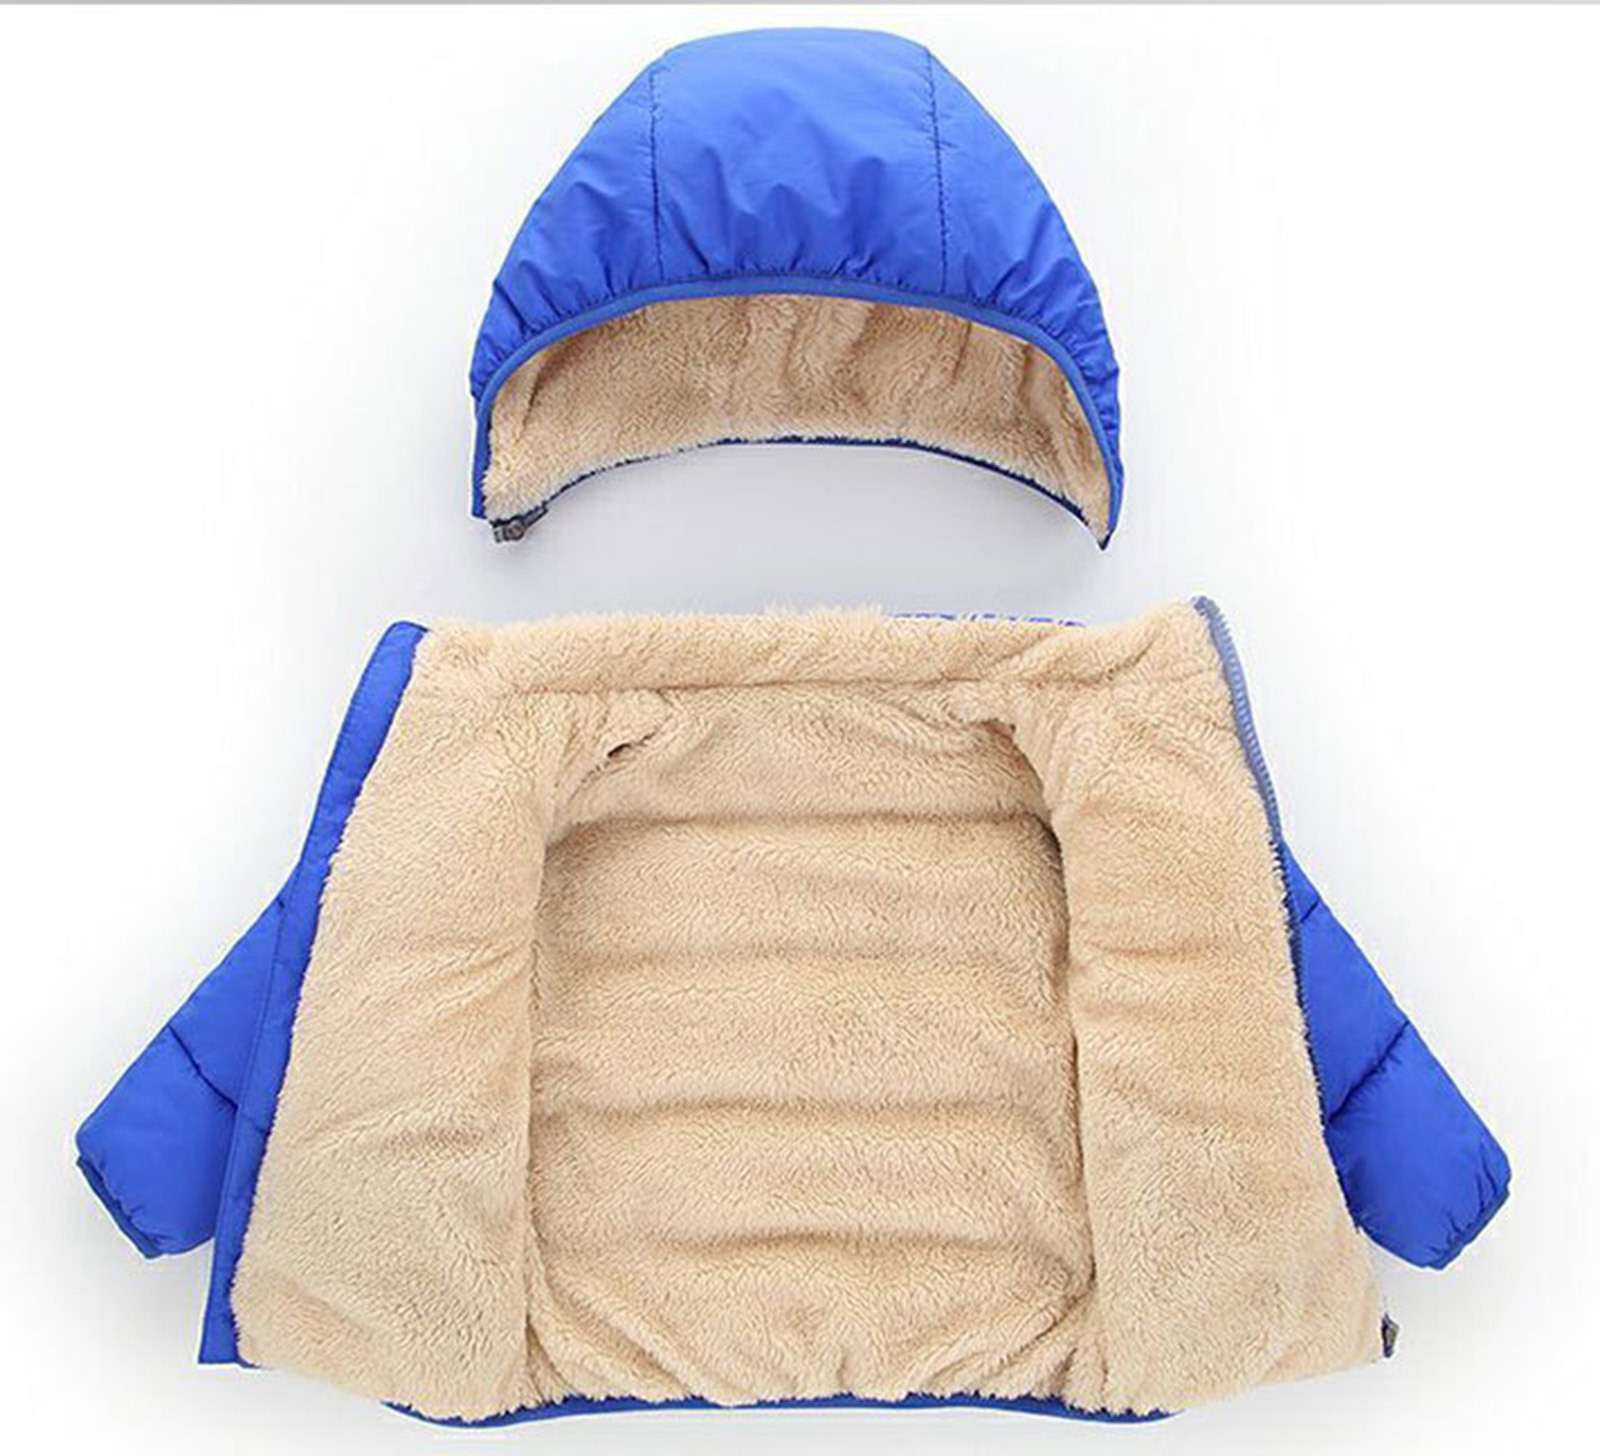 Kids Child Toddler Baby Boys Girls Solid Winter Hooded Coat Jacket Thick Warm Outerwear Clothes Outfits - image 5 of 5